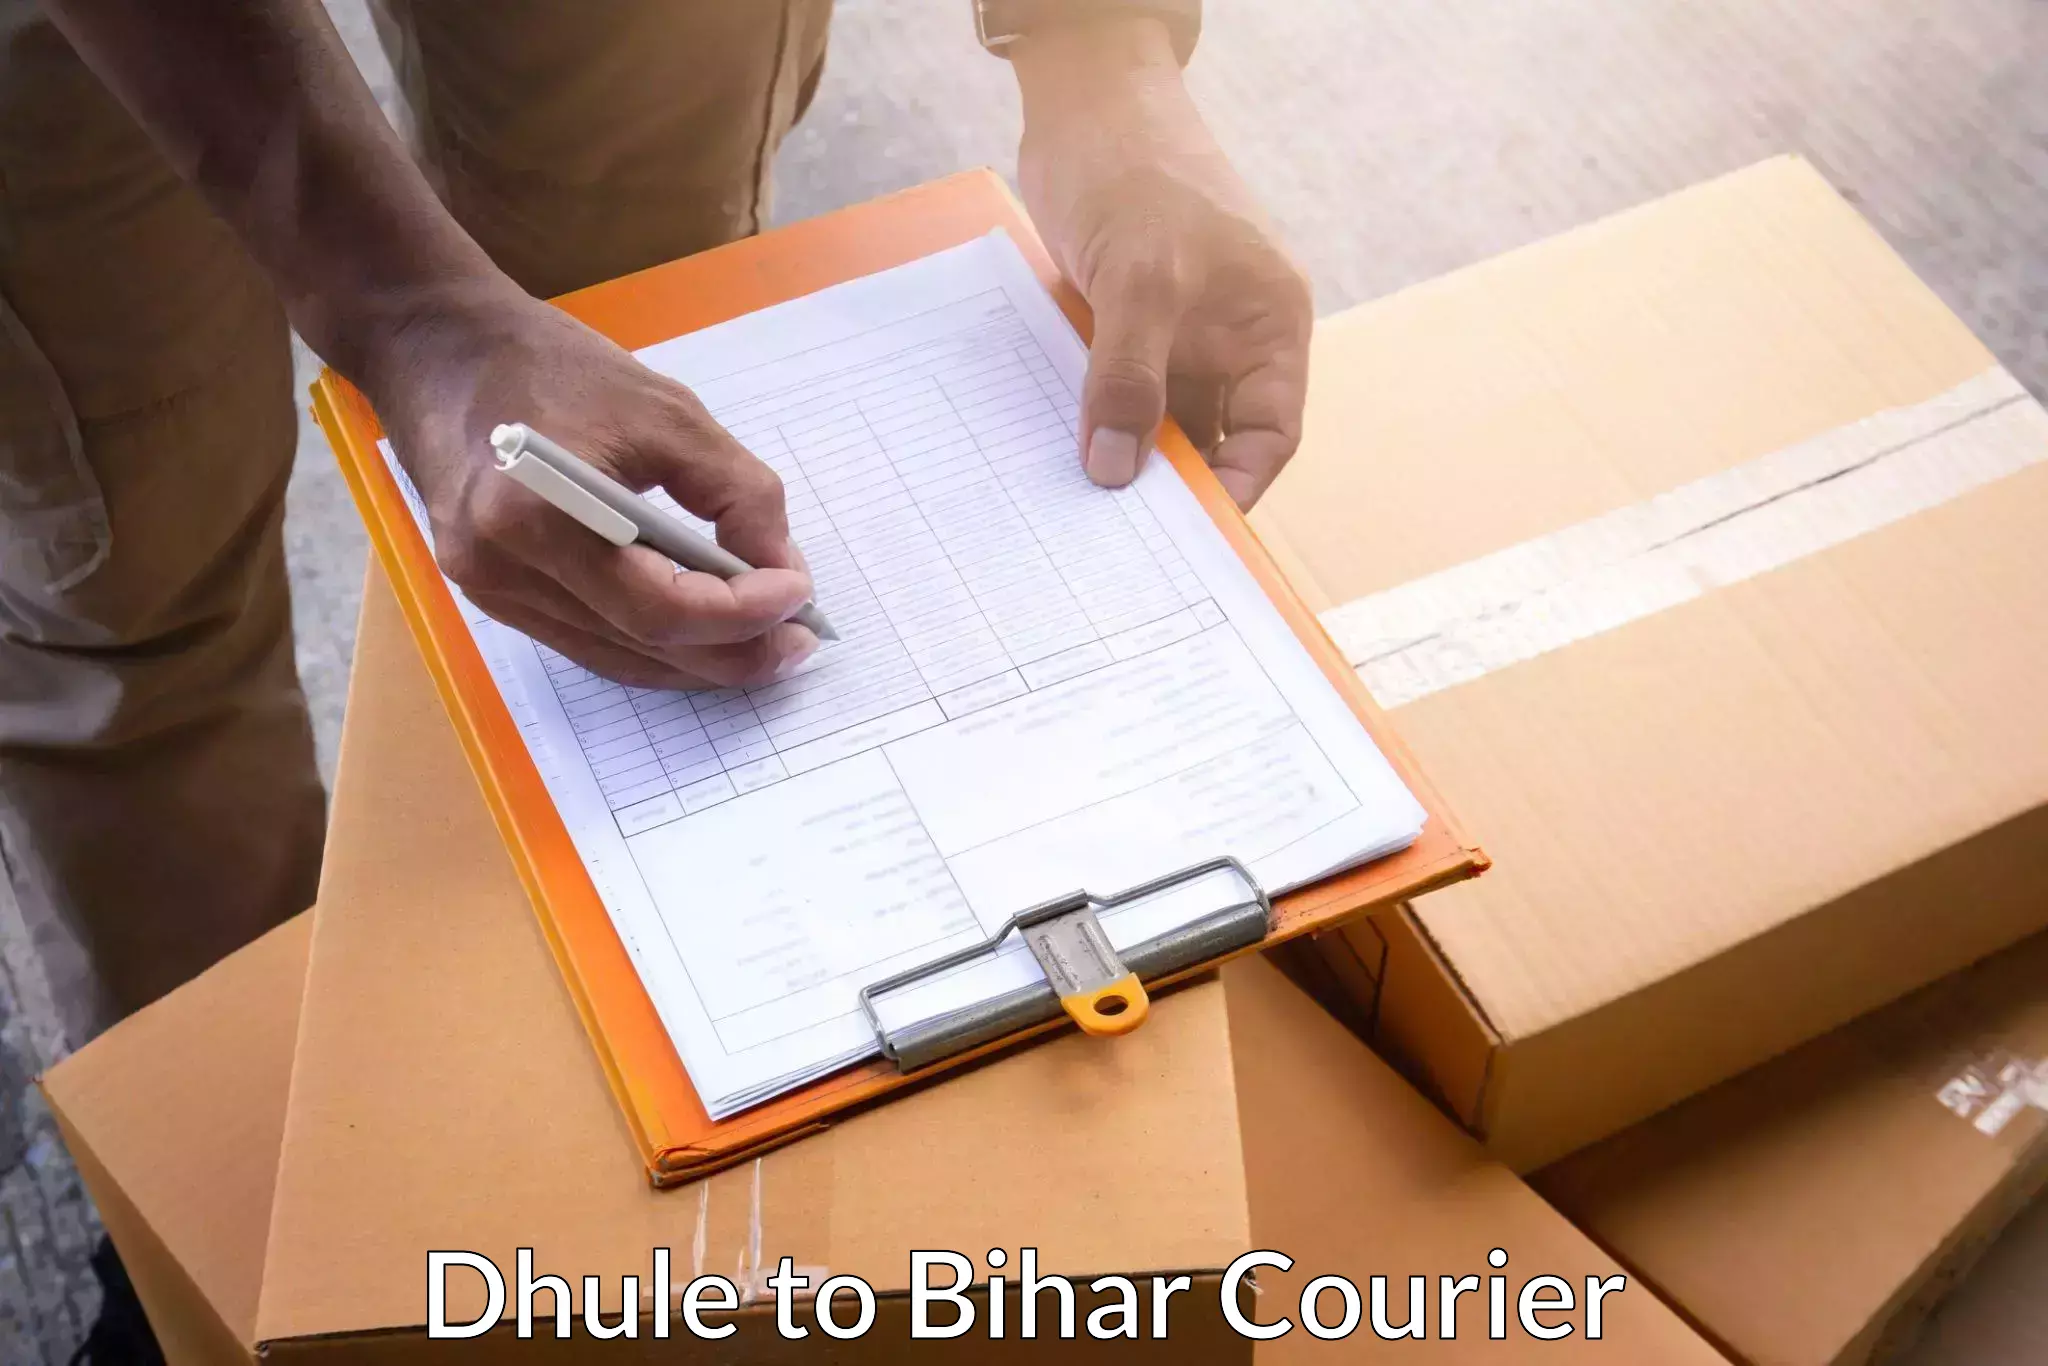 Package delivery network Dhule to Bharwara